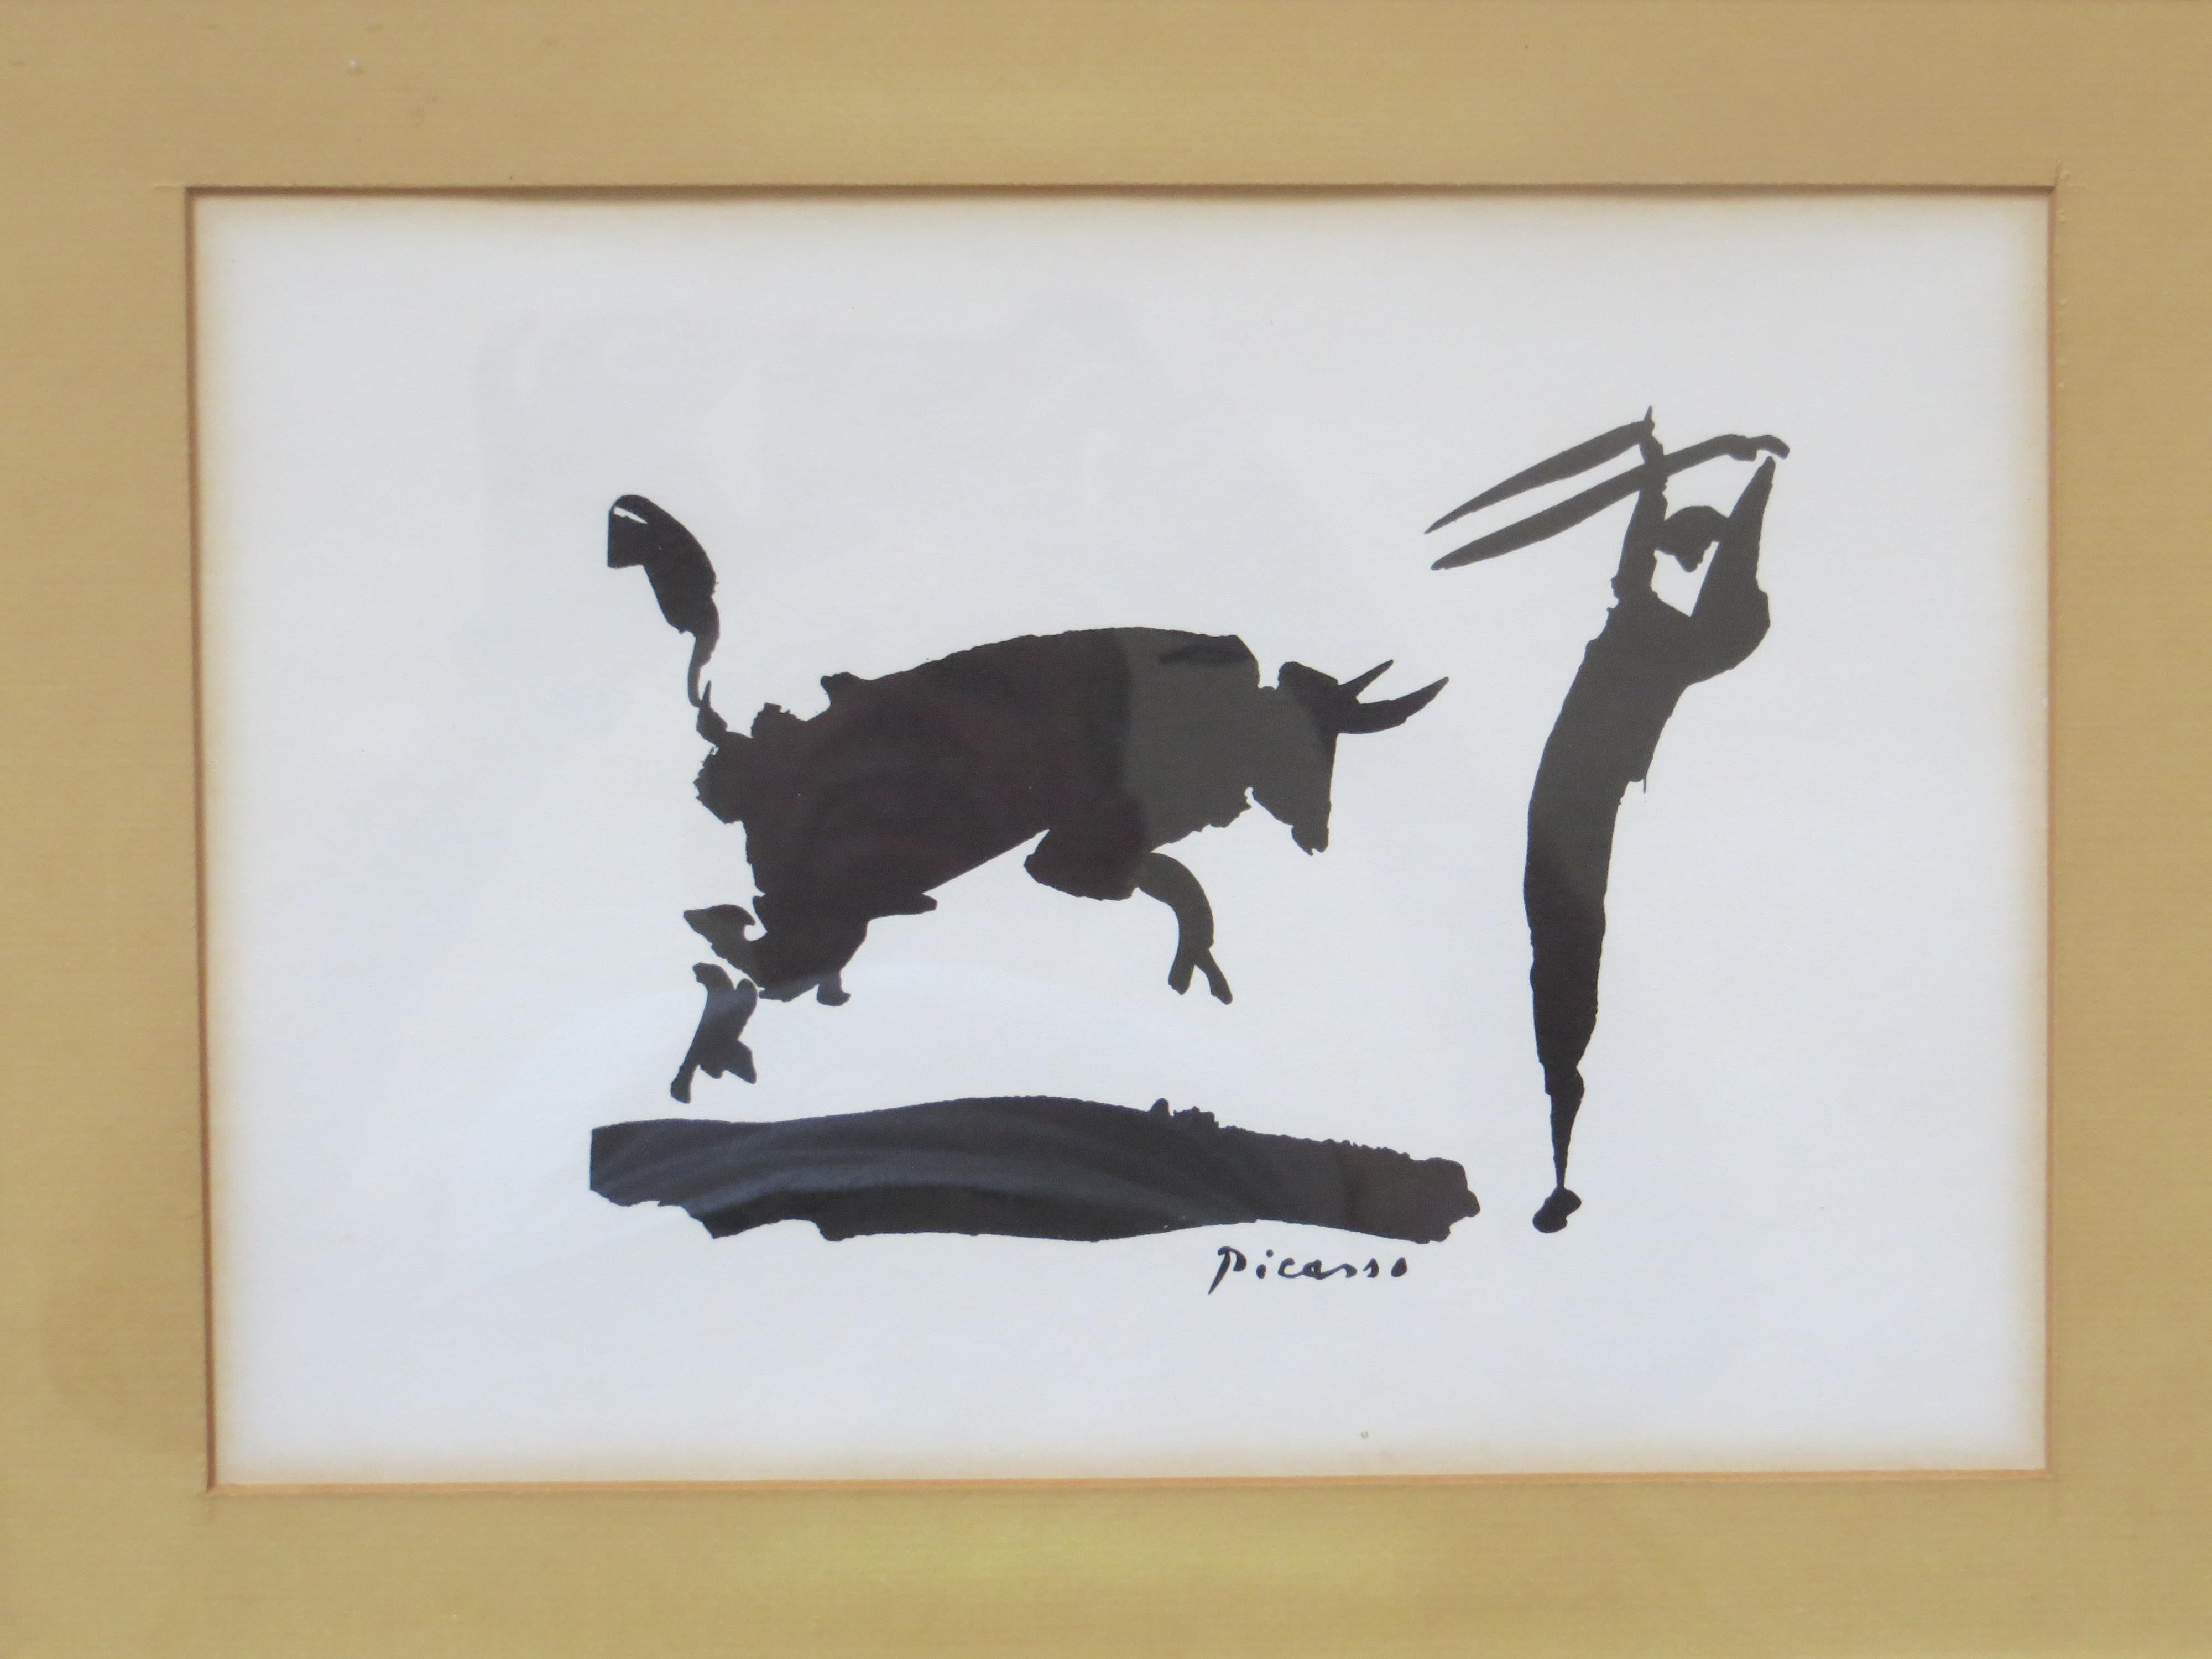 After Pablo Picasso,  Bullfighting  1